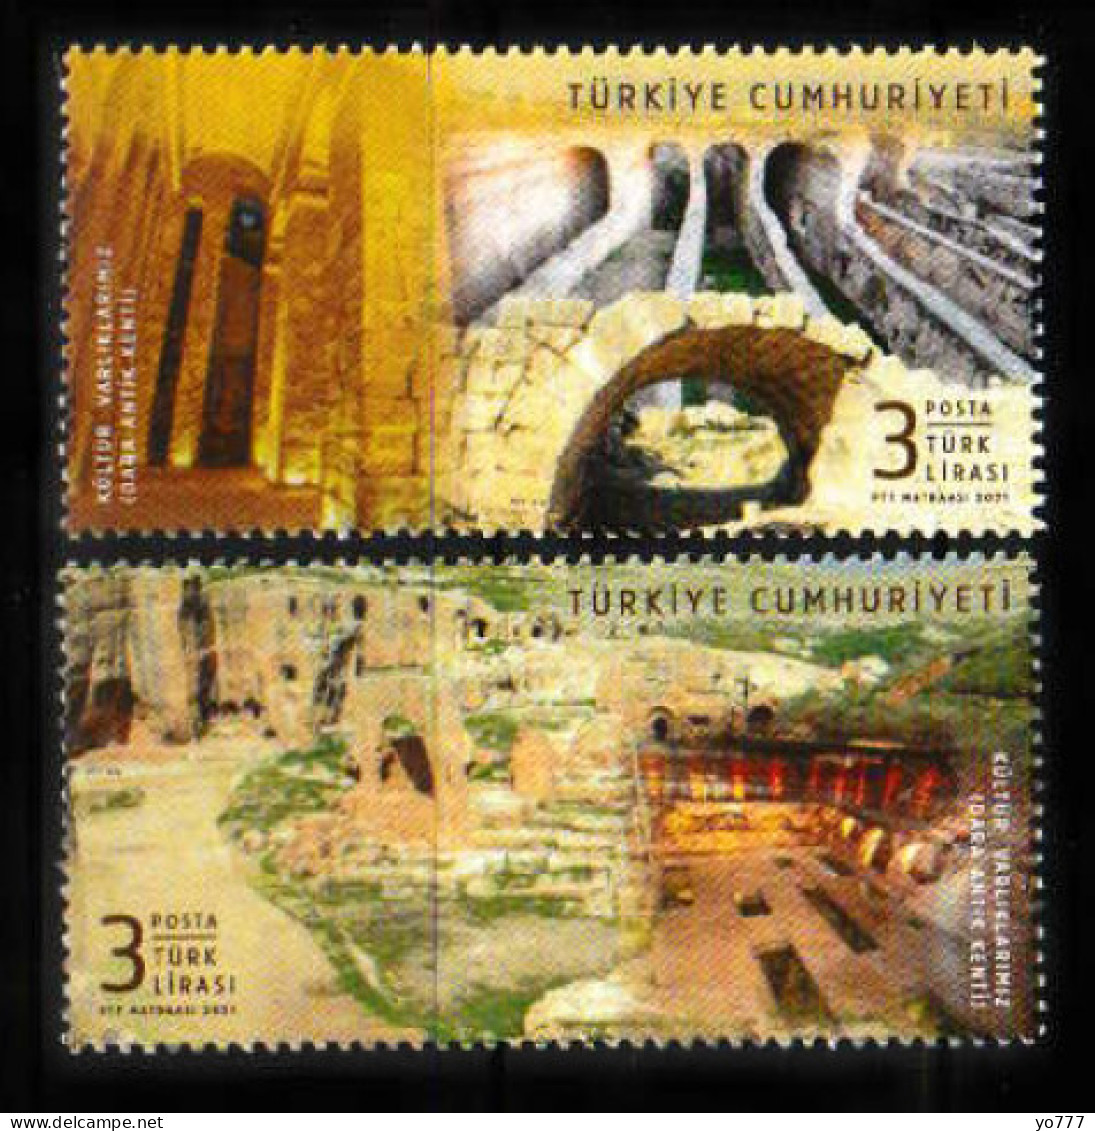 (4547-48) OUR CULTURAL ASSETS (ANCIENT CITY OF DARA) MNH** - Neufs